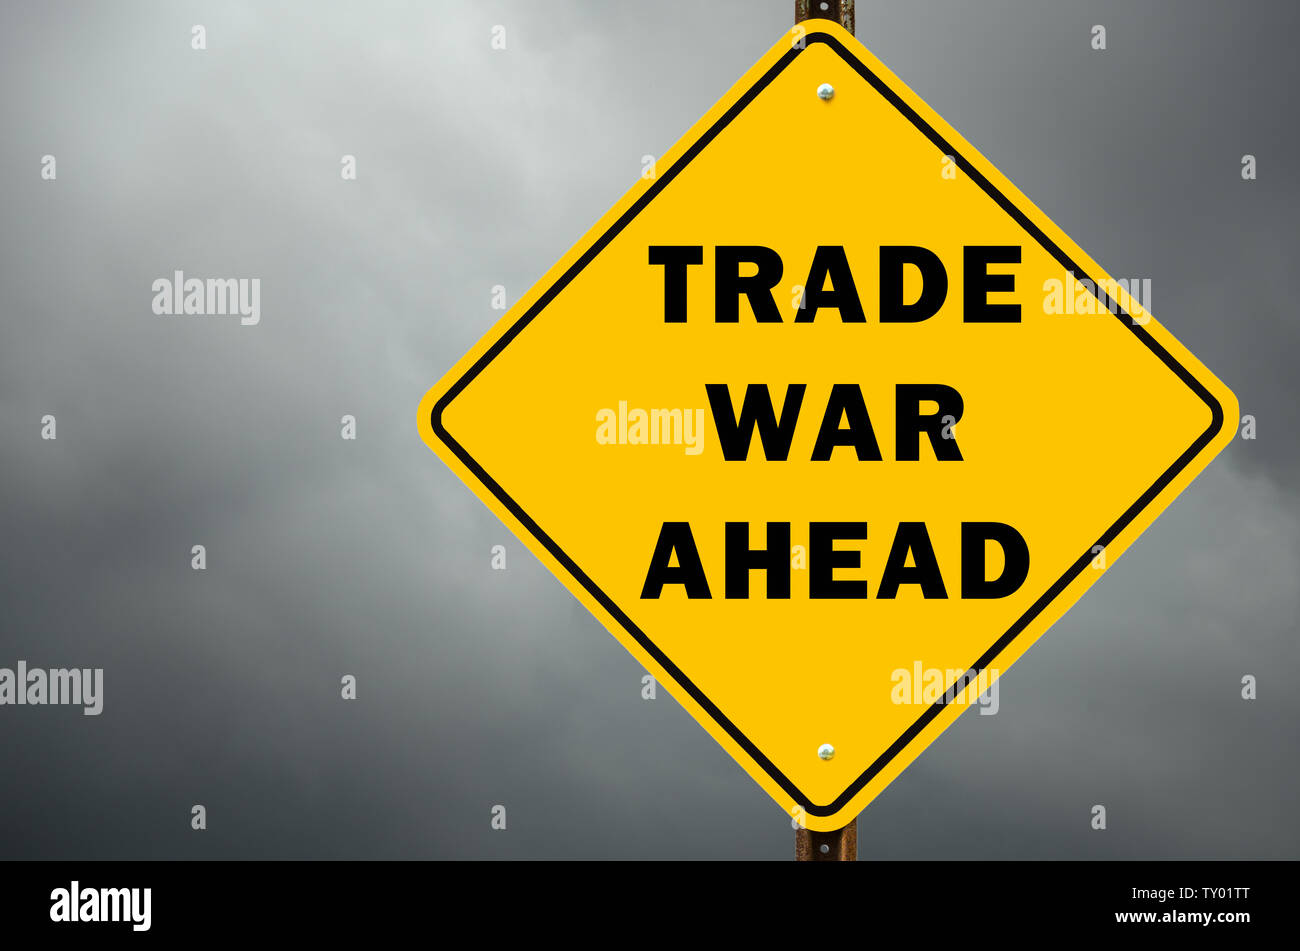 Trade war ahead conceptual ywllow warning road sign against stormy sky Stock Photo